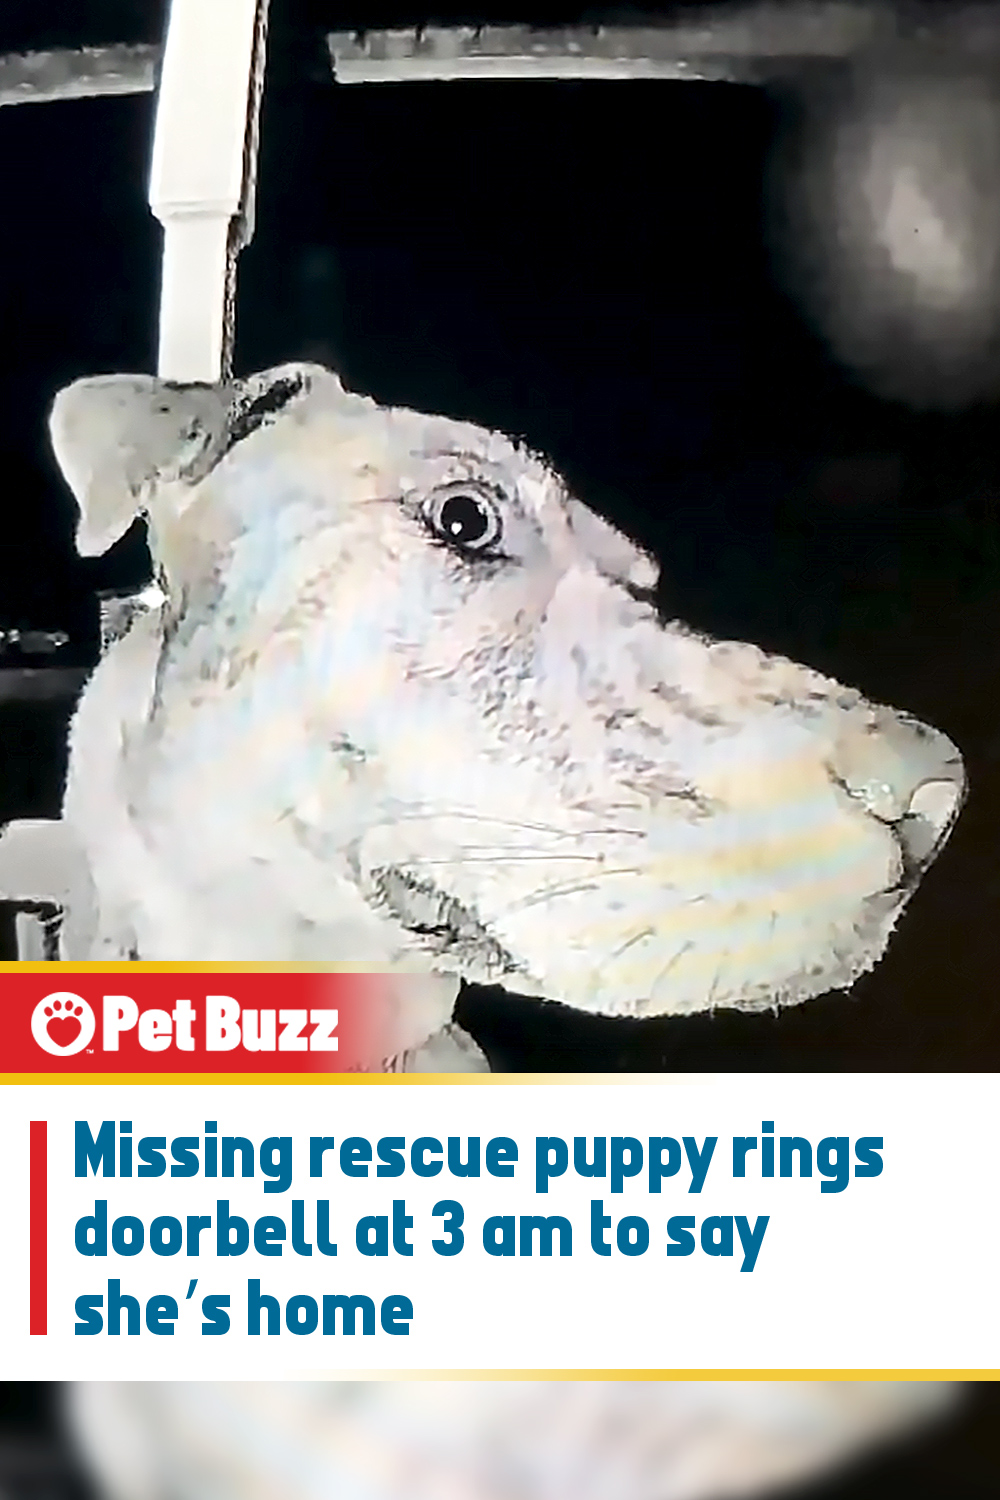 Missing rescue puppy rings doorbell at 3 am to say she’s home